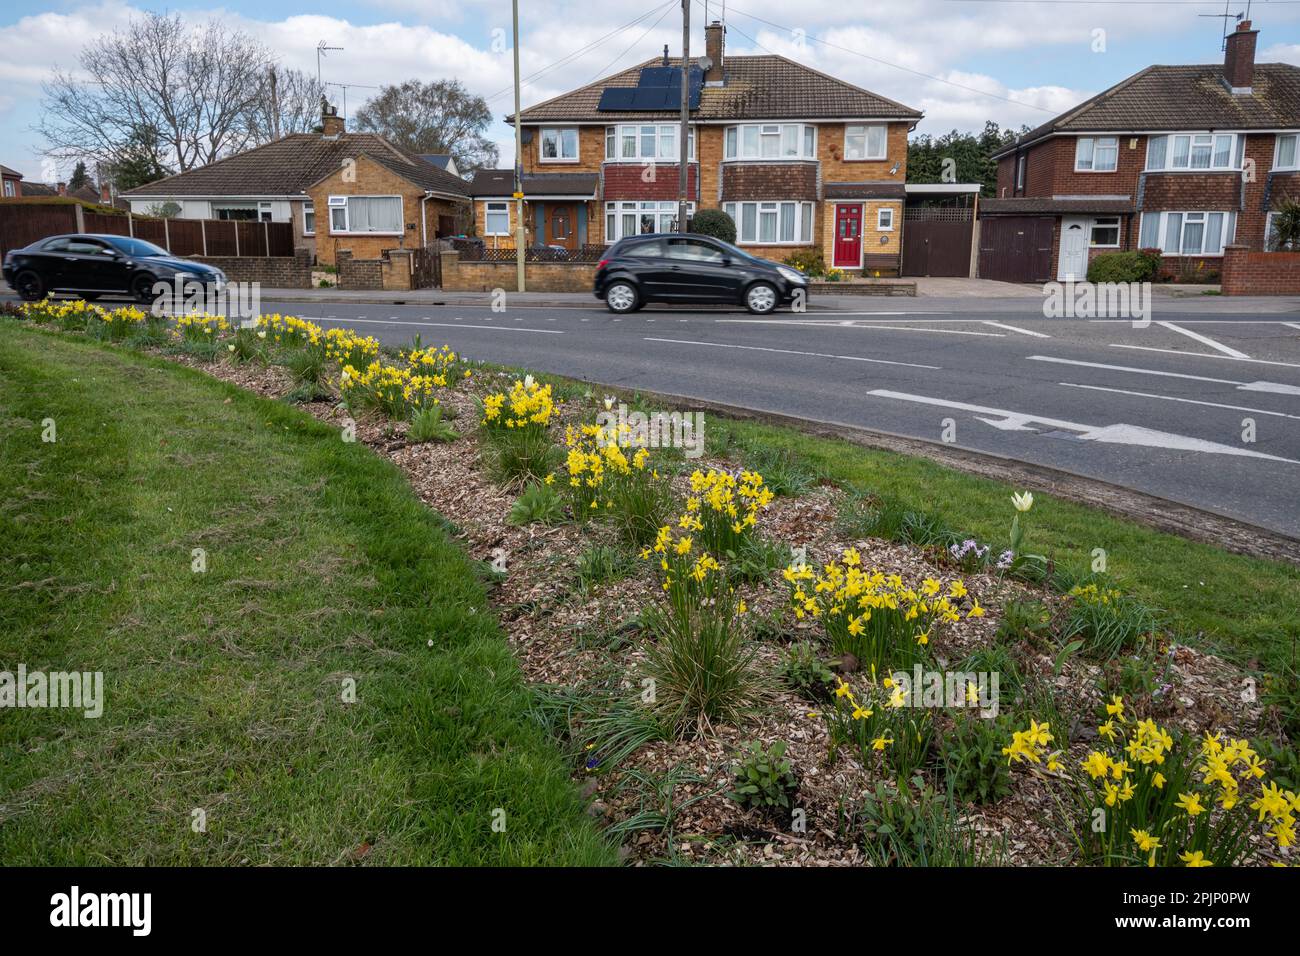 April 4th, 2023. Flowerbeds on roundabouts in Farnborough, Hampshire, UK, have been planted with bulbs and perennials this year by Rushmoor Borough Council instead of the usual annuals. In previous years, the flowers required a lot of watering. The new plants should be more cost-effective, and more sustainable since they require less water and will be better suited to the summer heatwaves and droughts that have become more frequent due to climate change. Stock Photo